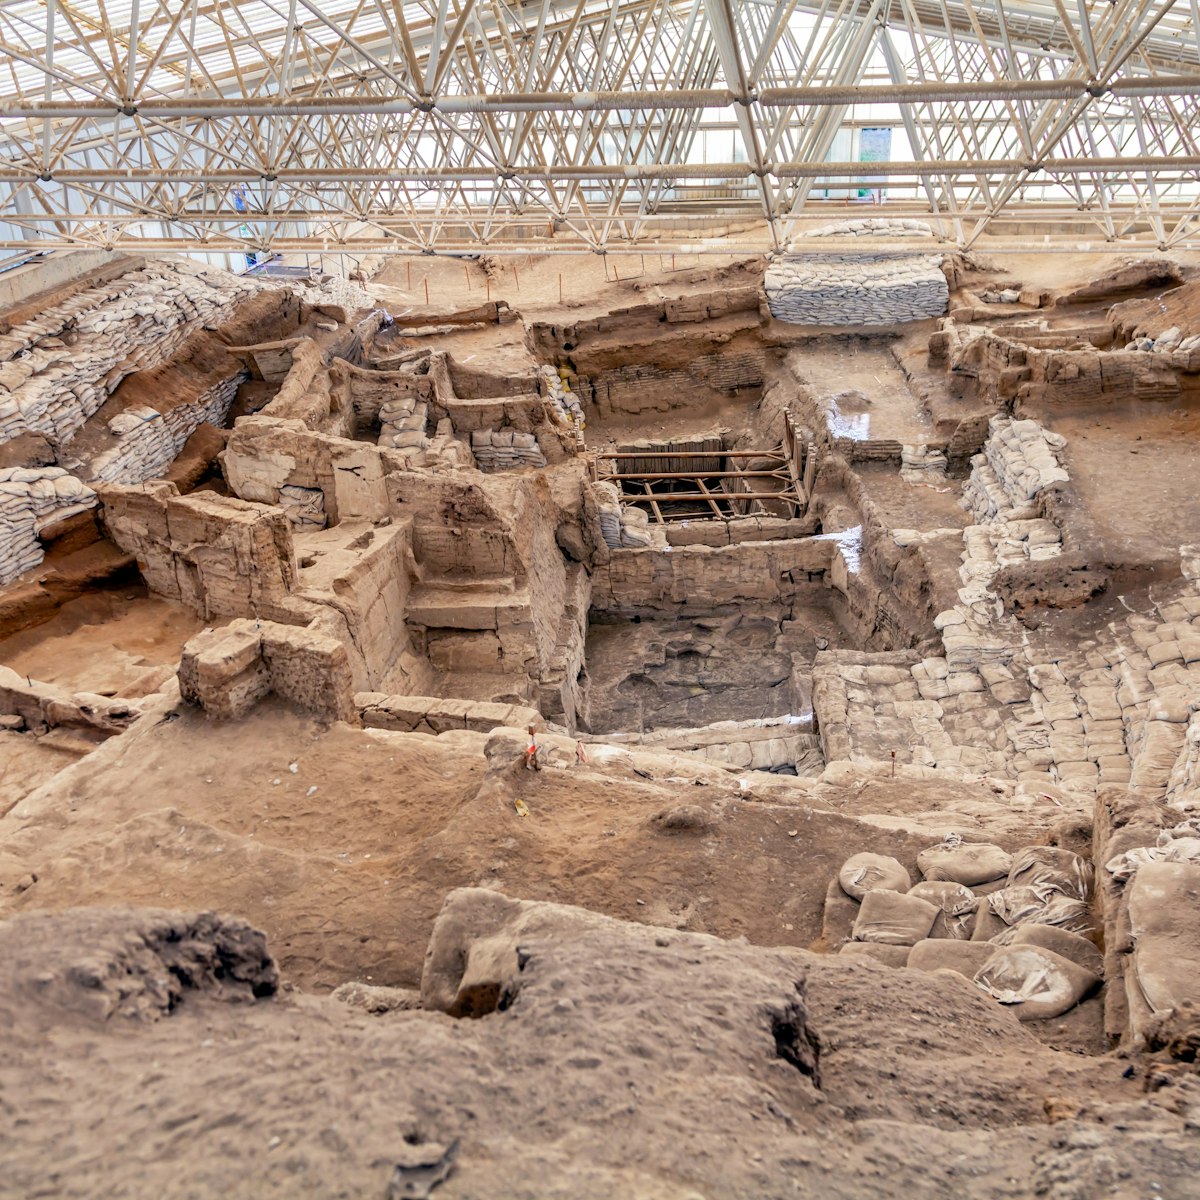 Neolithic Site of Çatalhöyük. UNESCO World Heritage Site. Catalhoyuk is oldest town in world with large Neolithic & Chalcolithic best preserved city settlement in Cumra, Konya. Built in 7500 BC. ; Shutterstock ID 1611692500; your: Bridget Brown; gl: 65050; netsuite: Online Editorial; full: POI Image Update